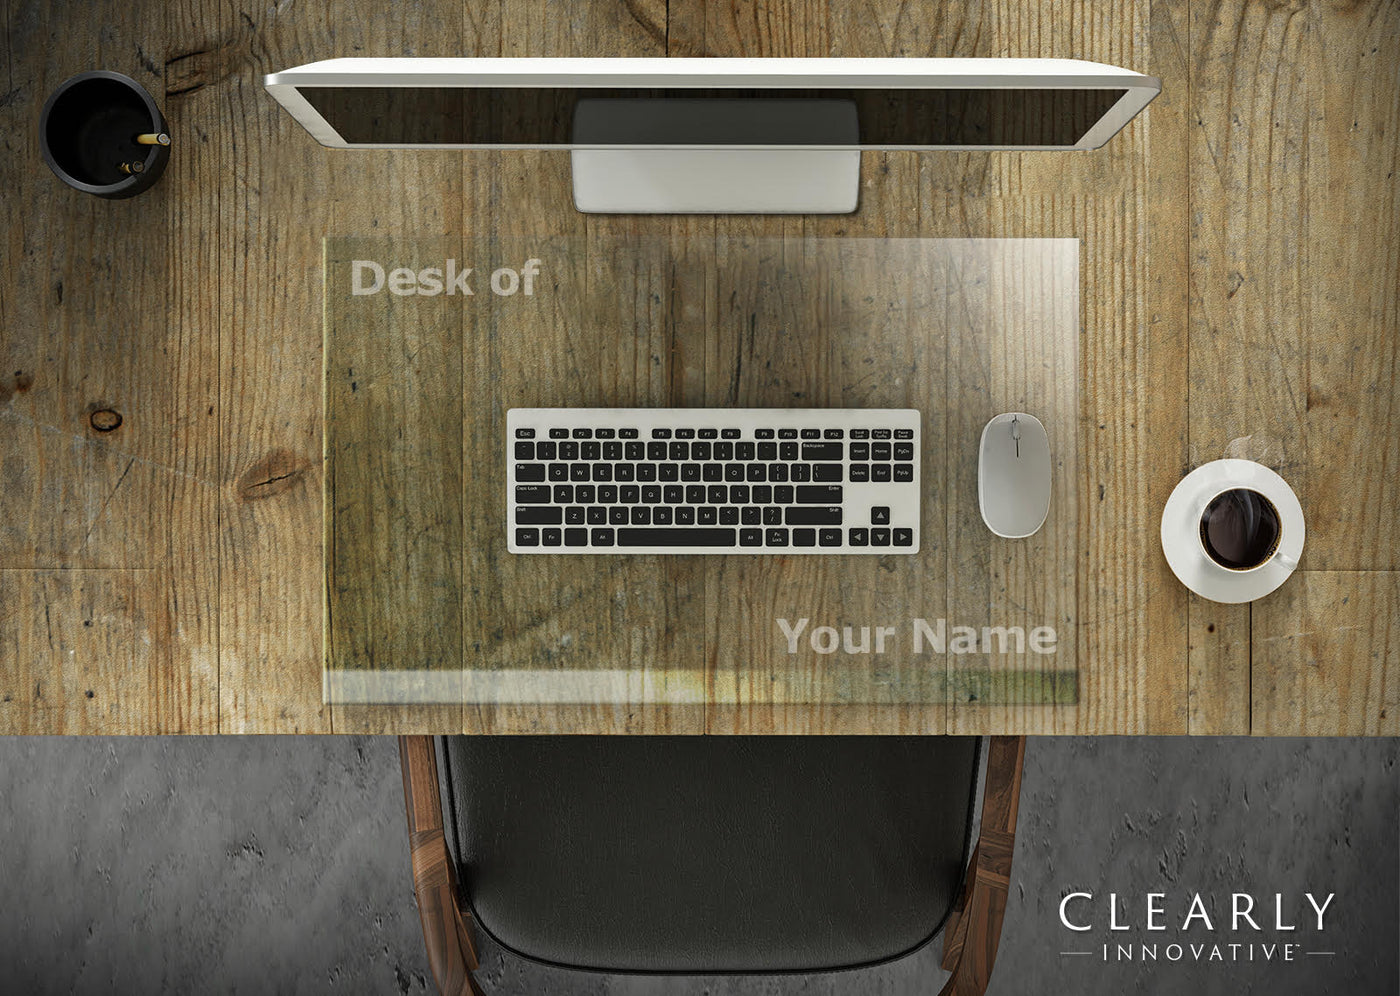 "Desk of" and "Your Name" will be customized in the same font